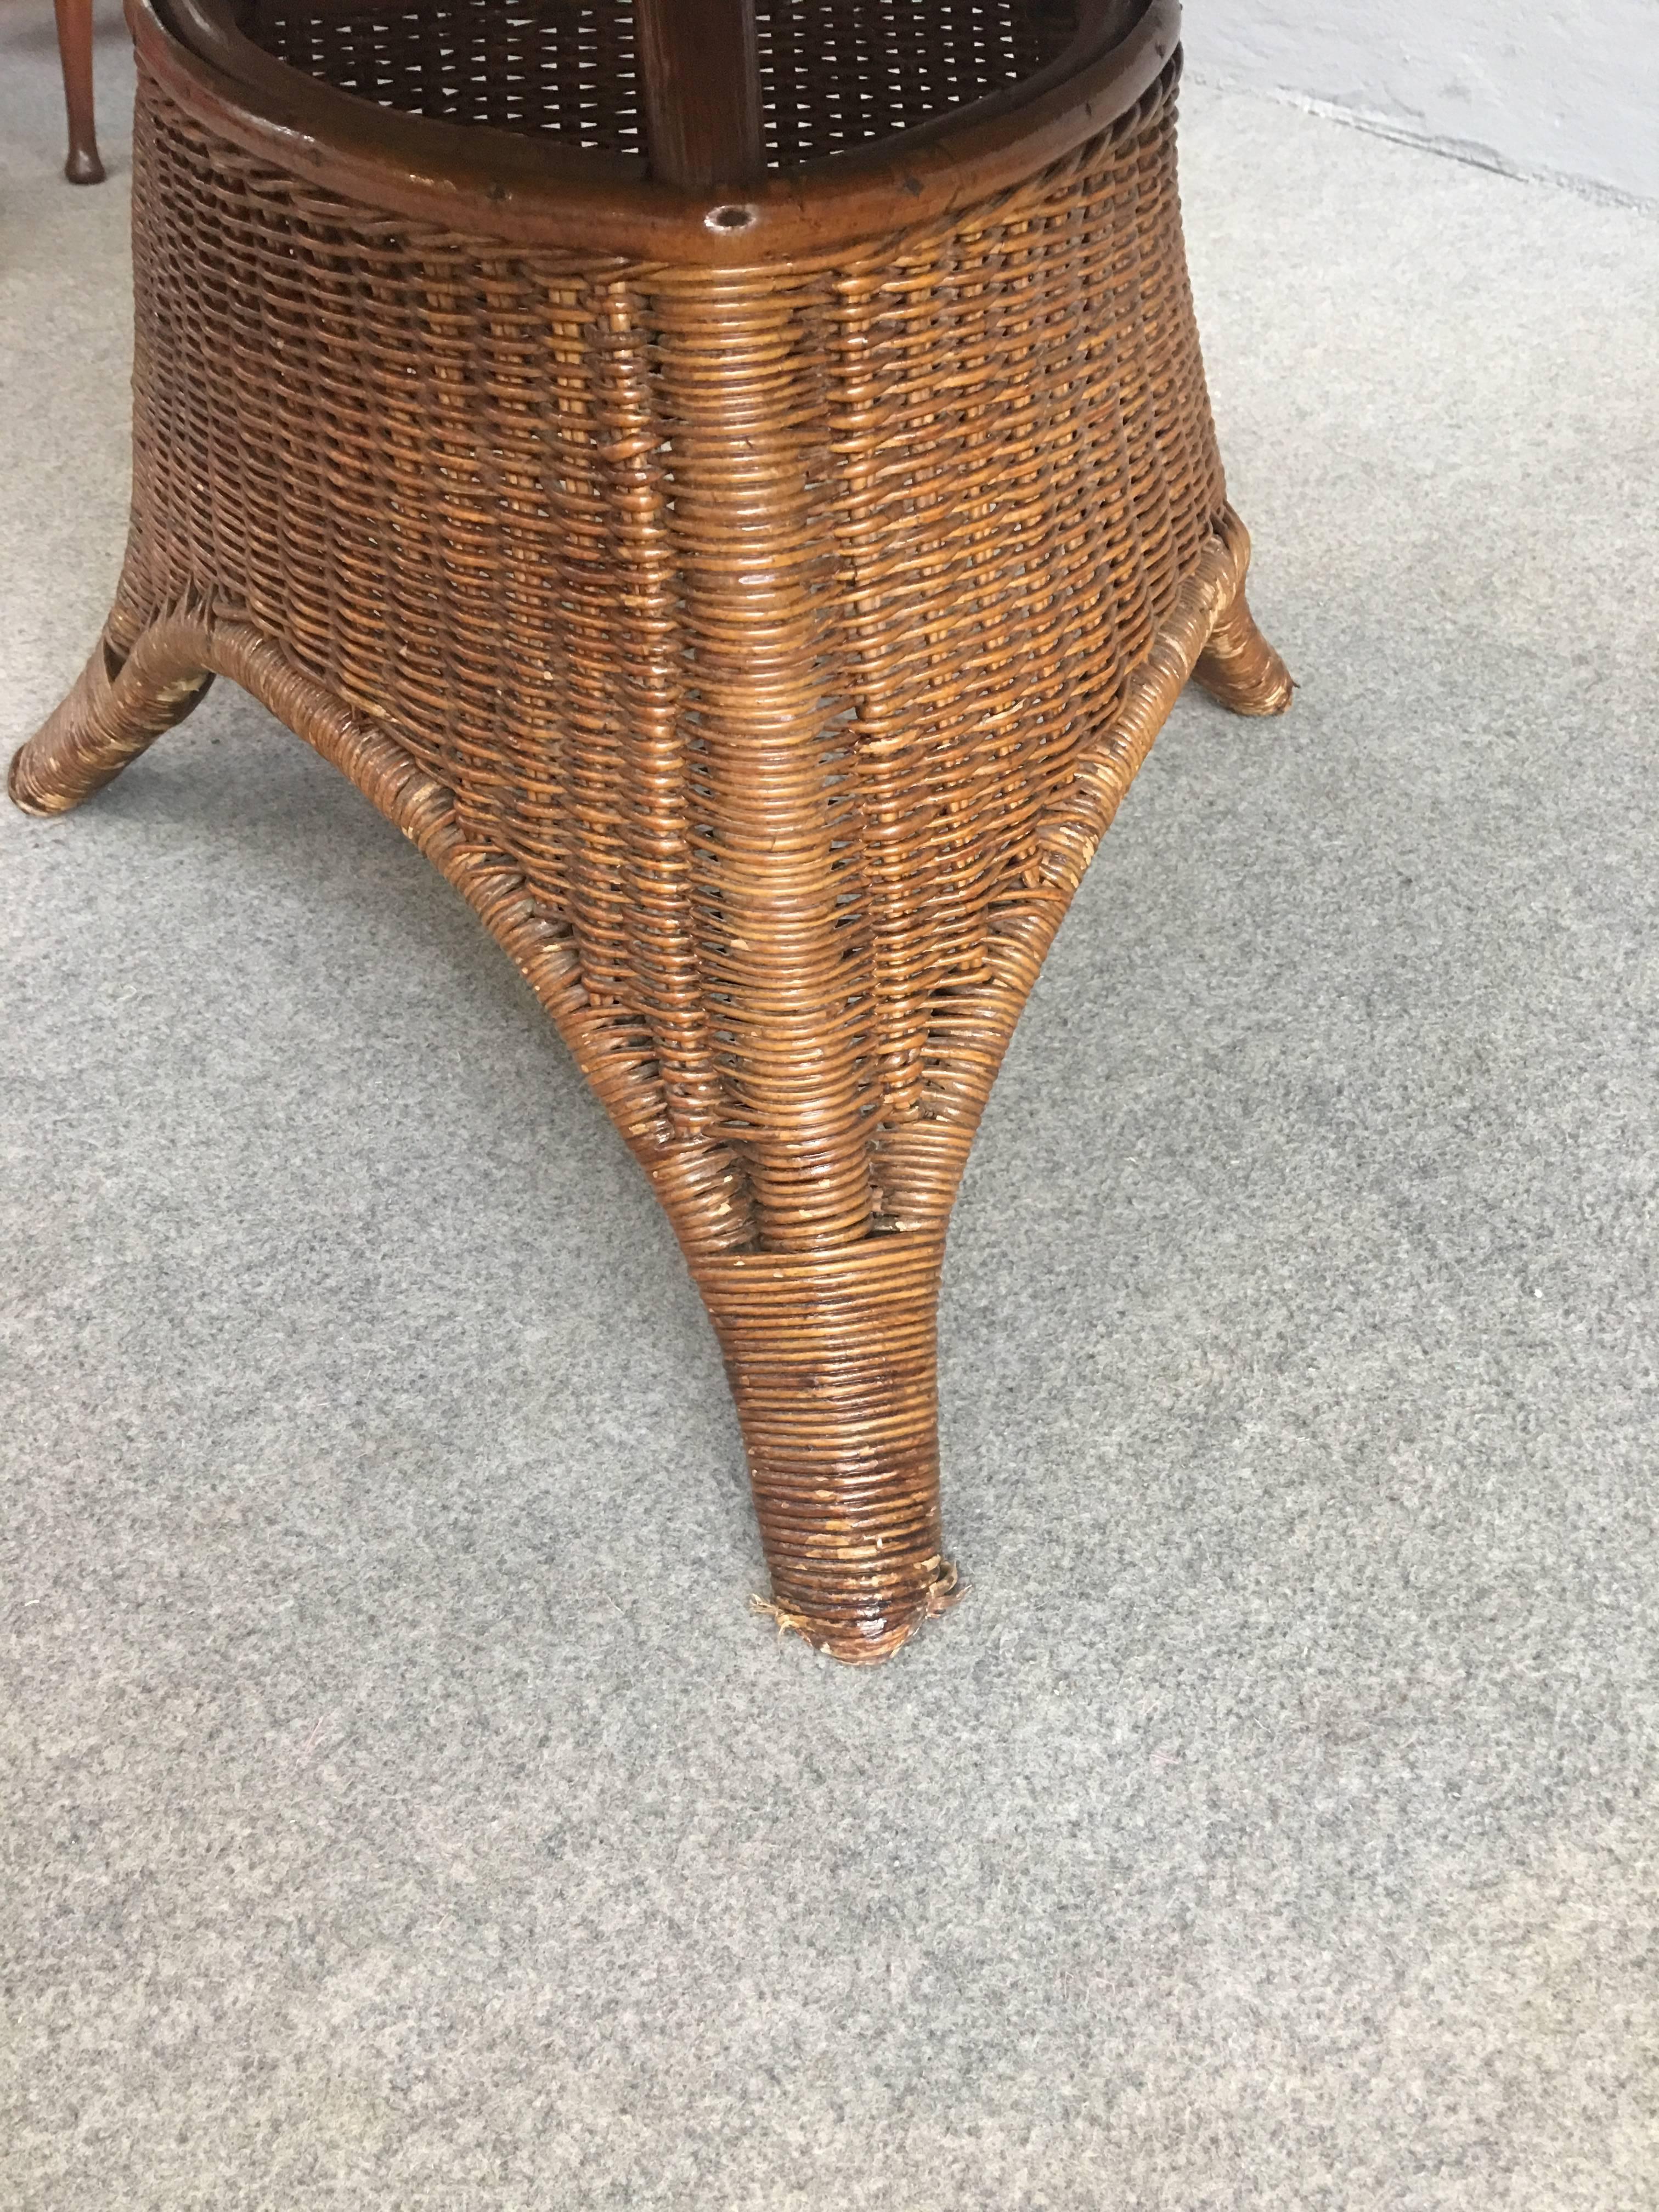 Charming Pair of Wicker Coffee Tables 1